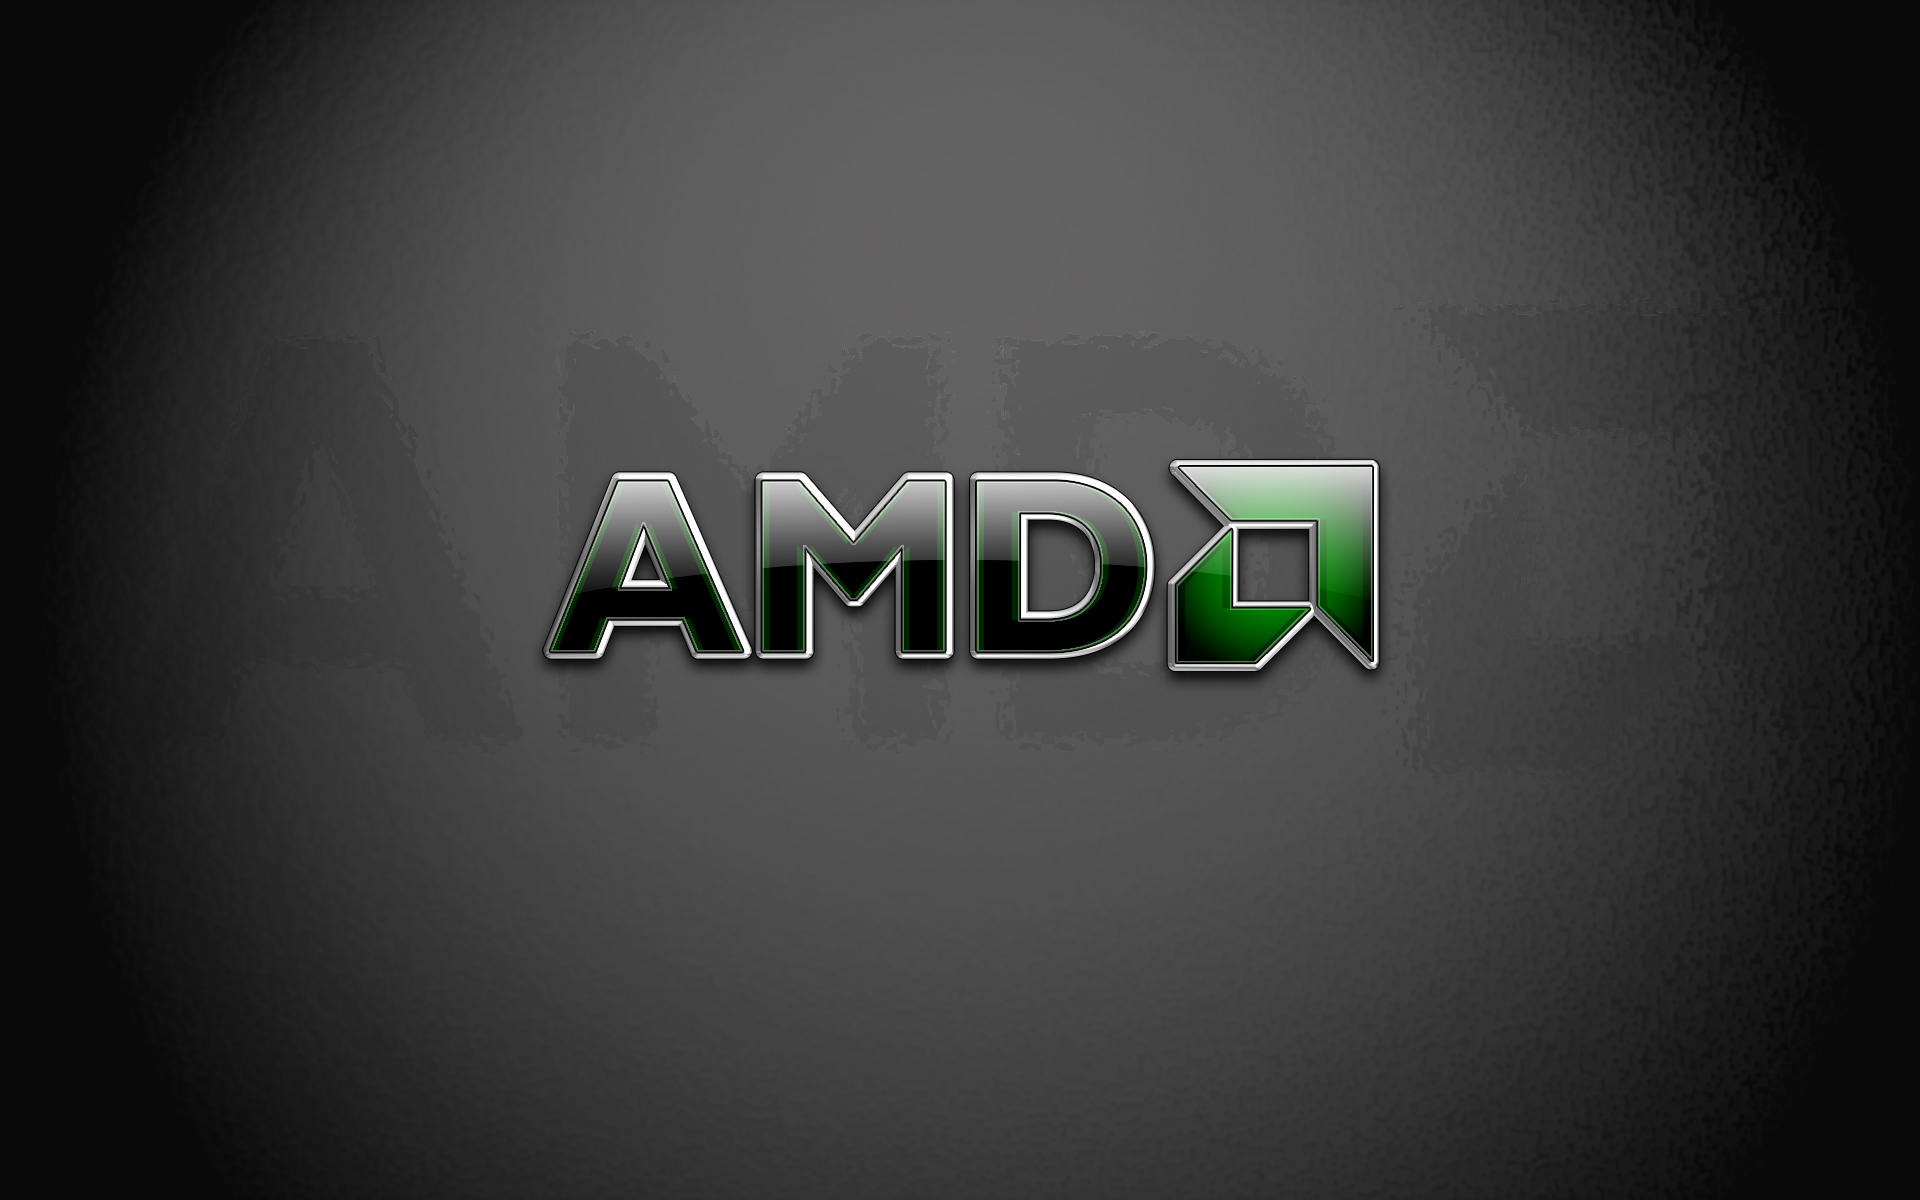 AMD Brings the Future of Computing to Life at 2015 International CES